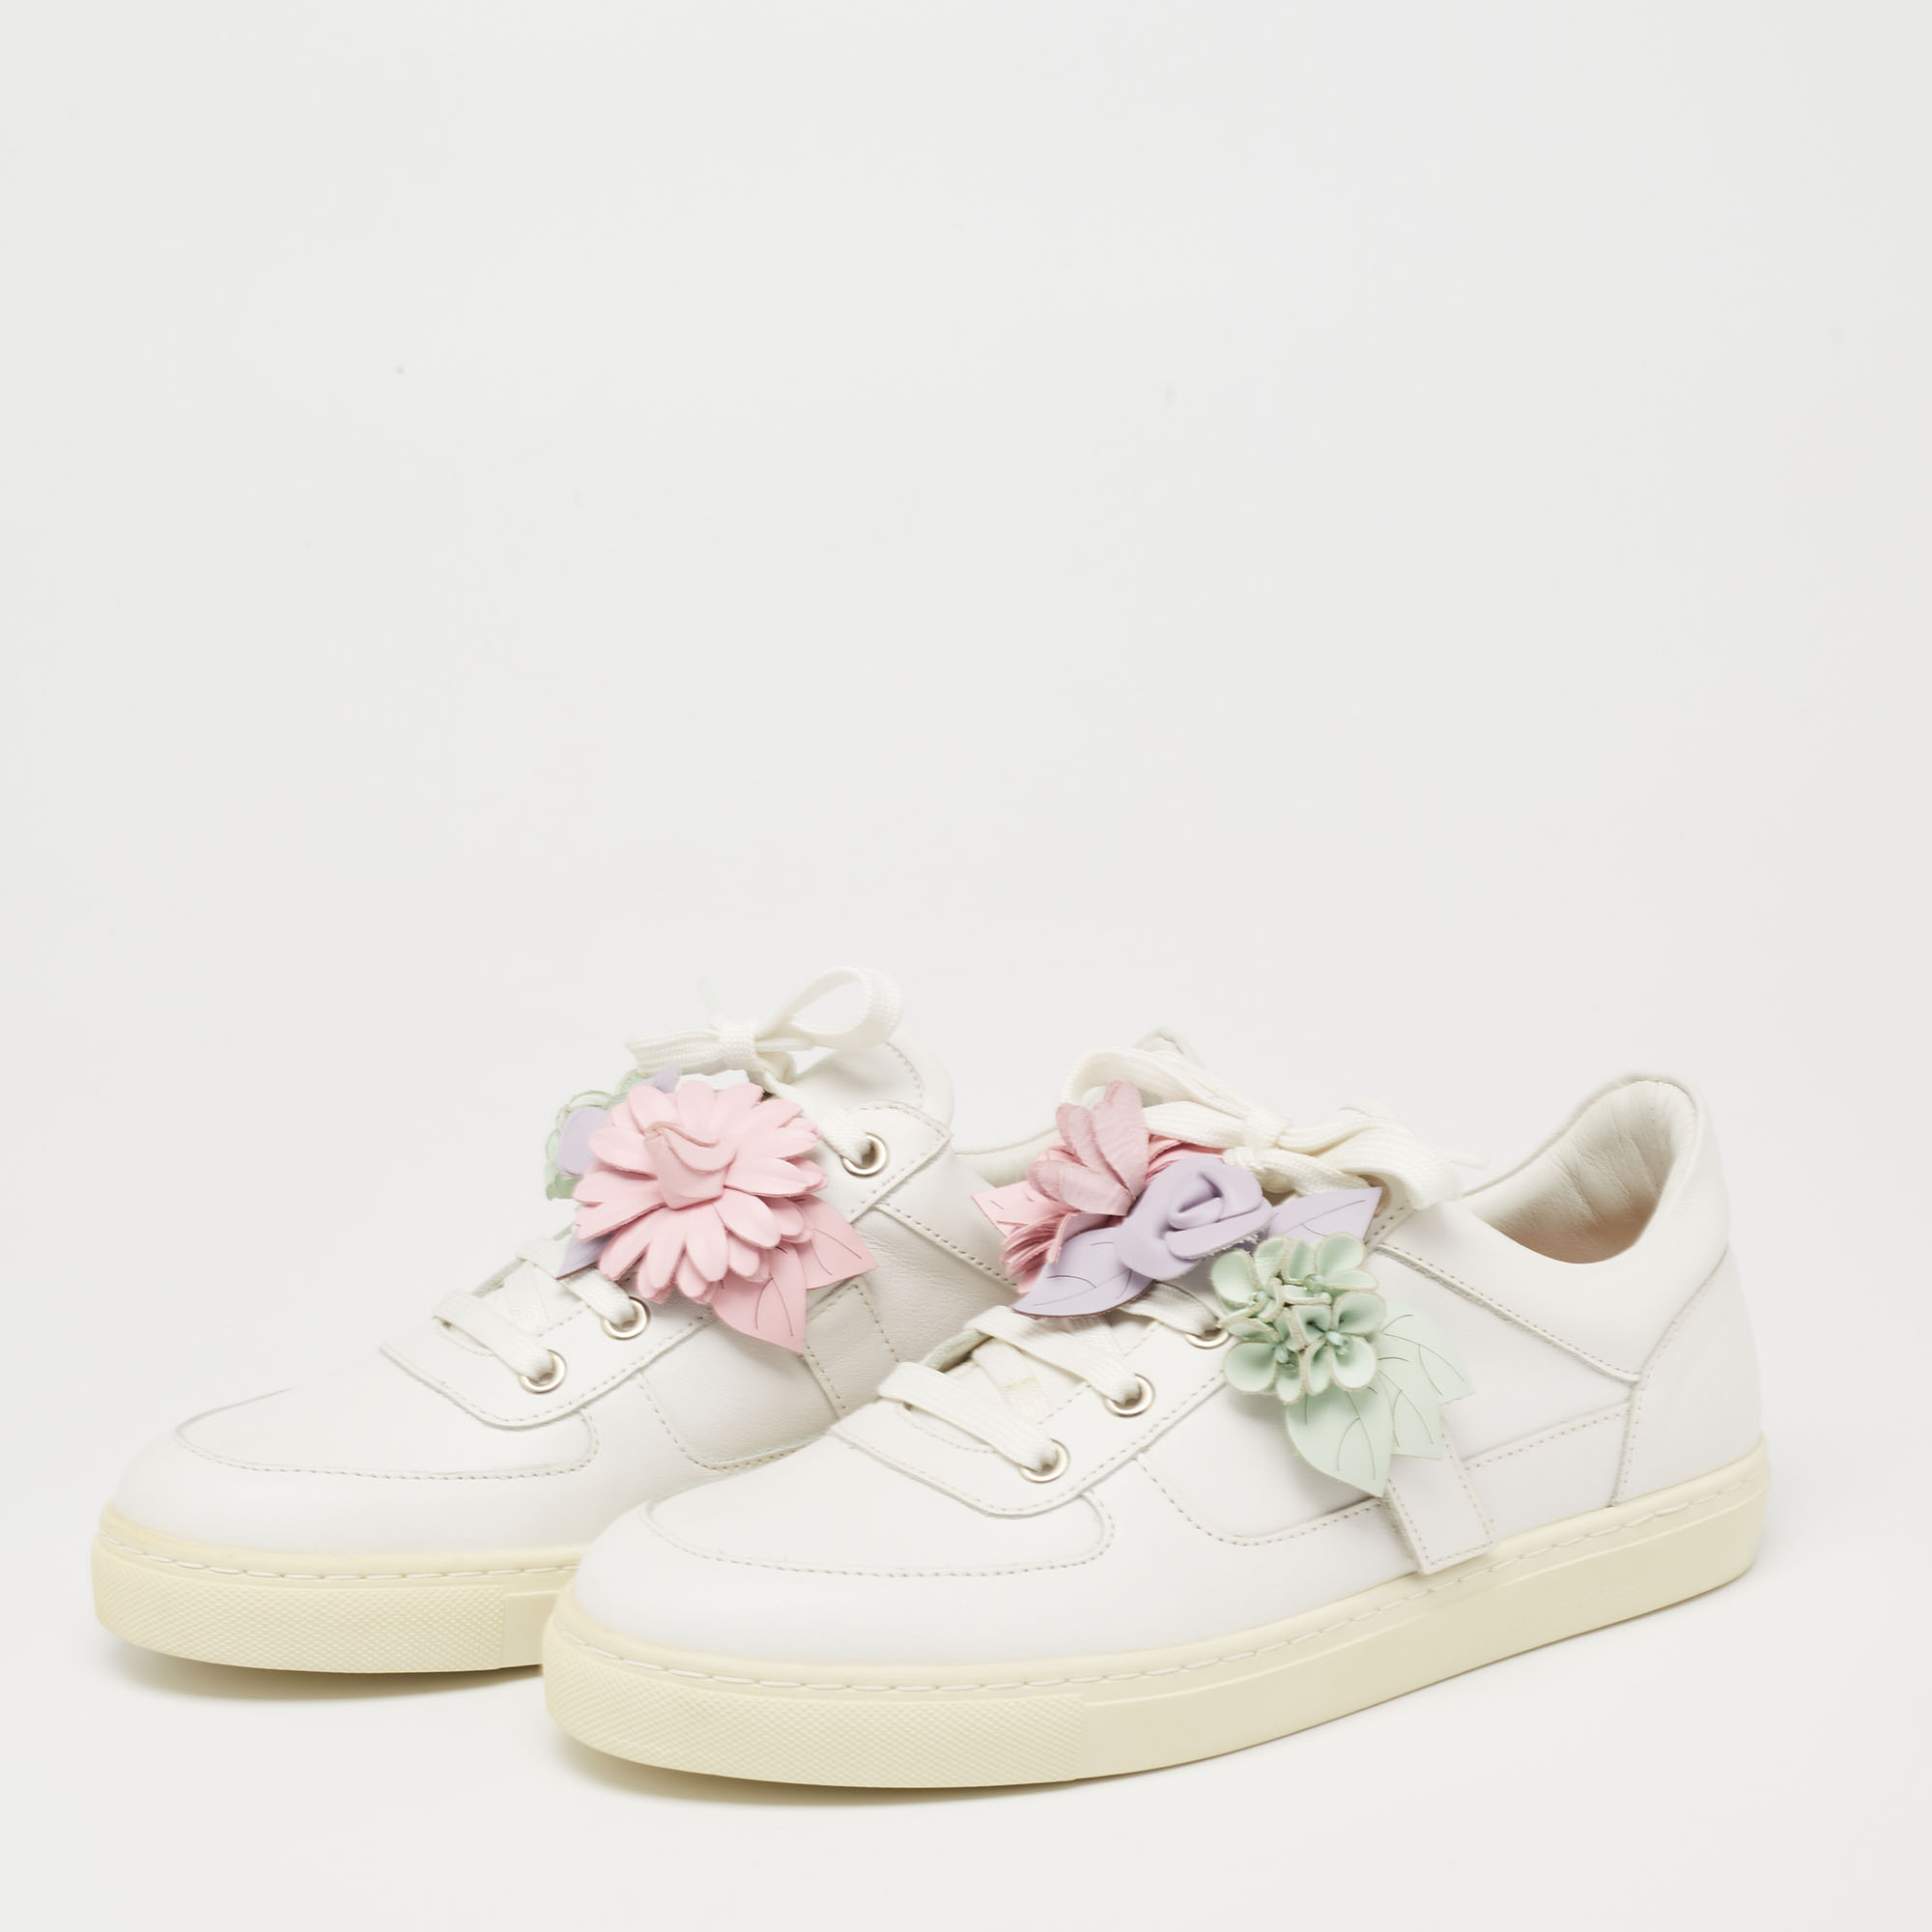 

Sophia Webster White Leather Lilico Flower Low Top Sneakers Size